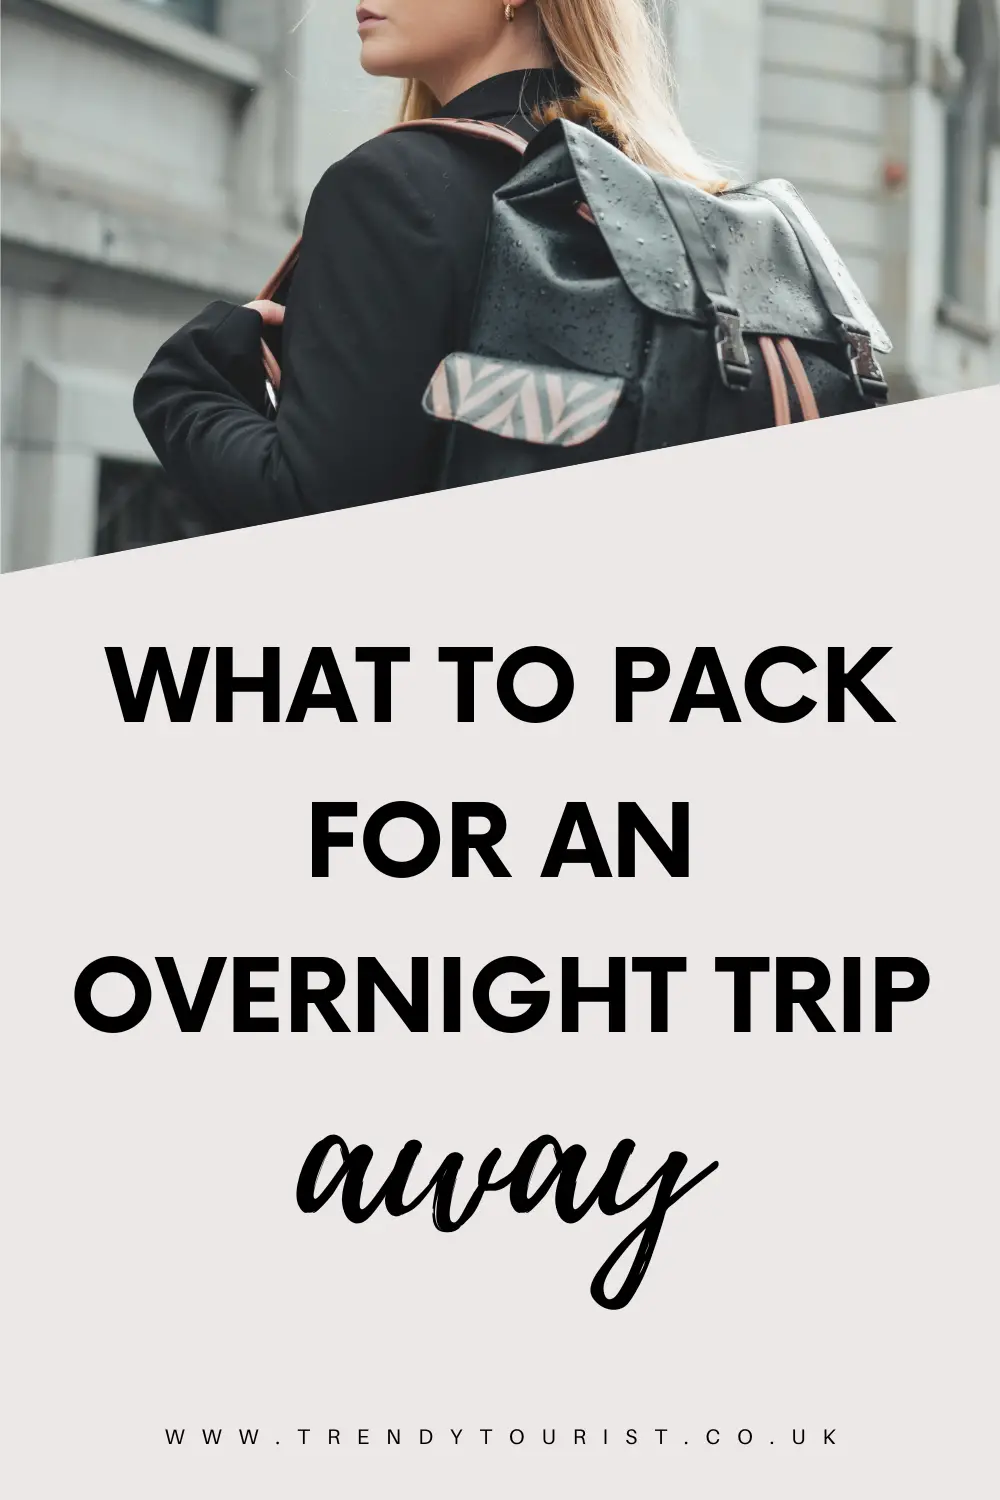 What to Pack for an Overnight Trip Away